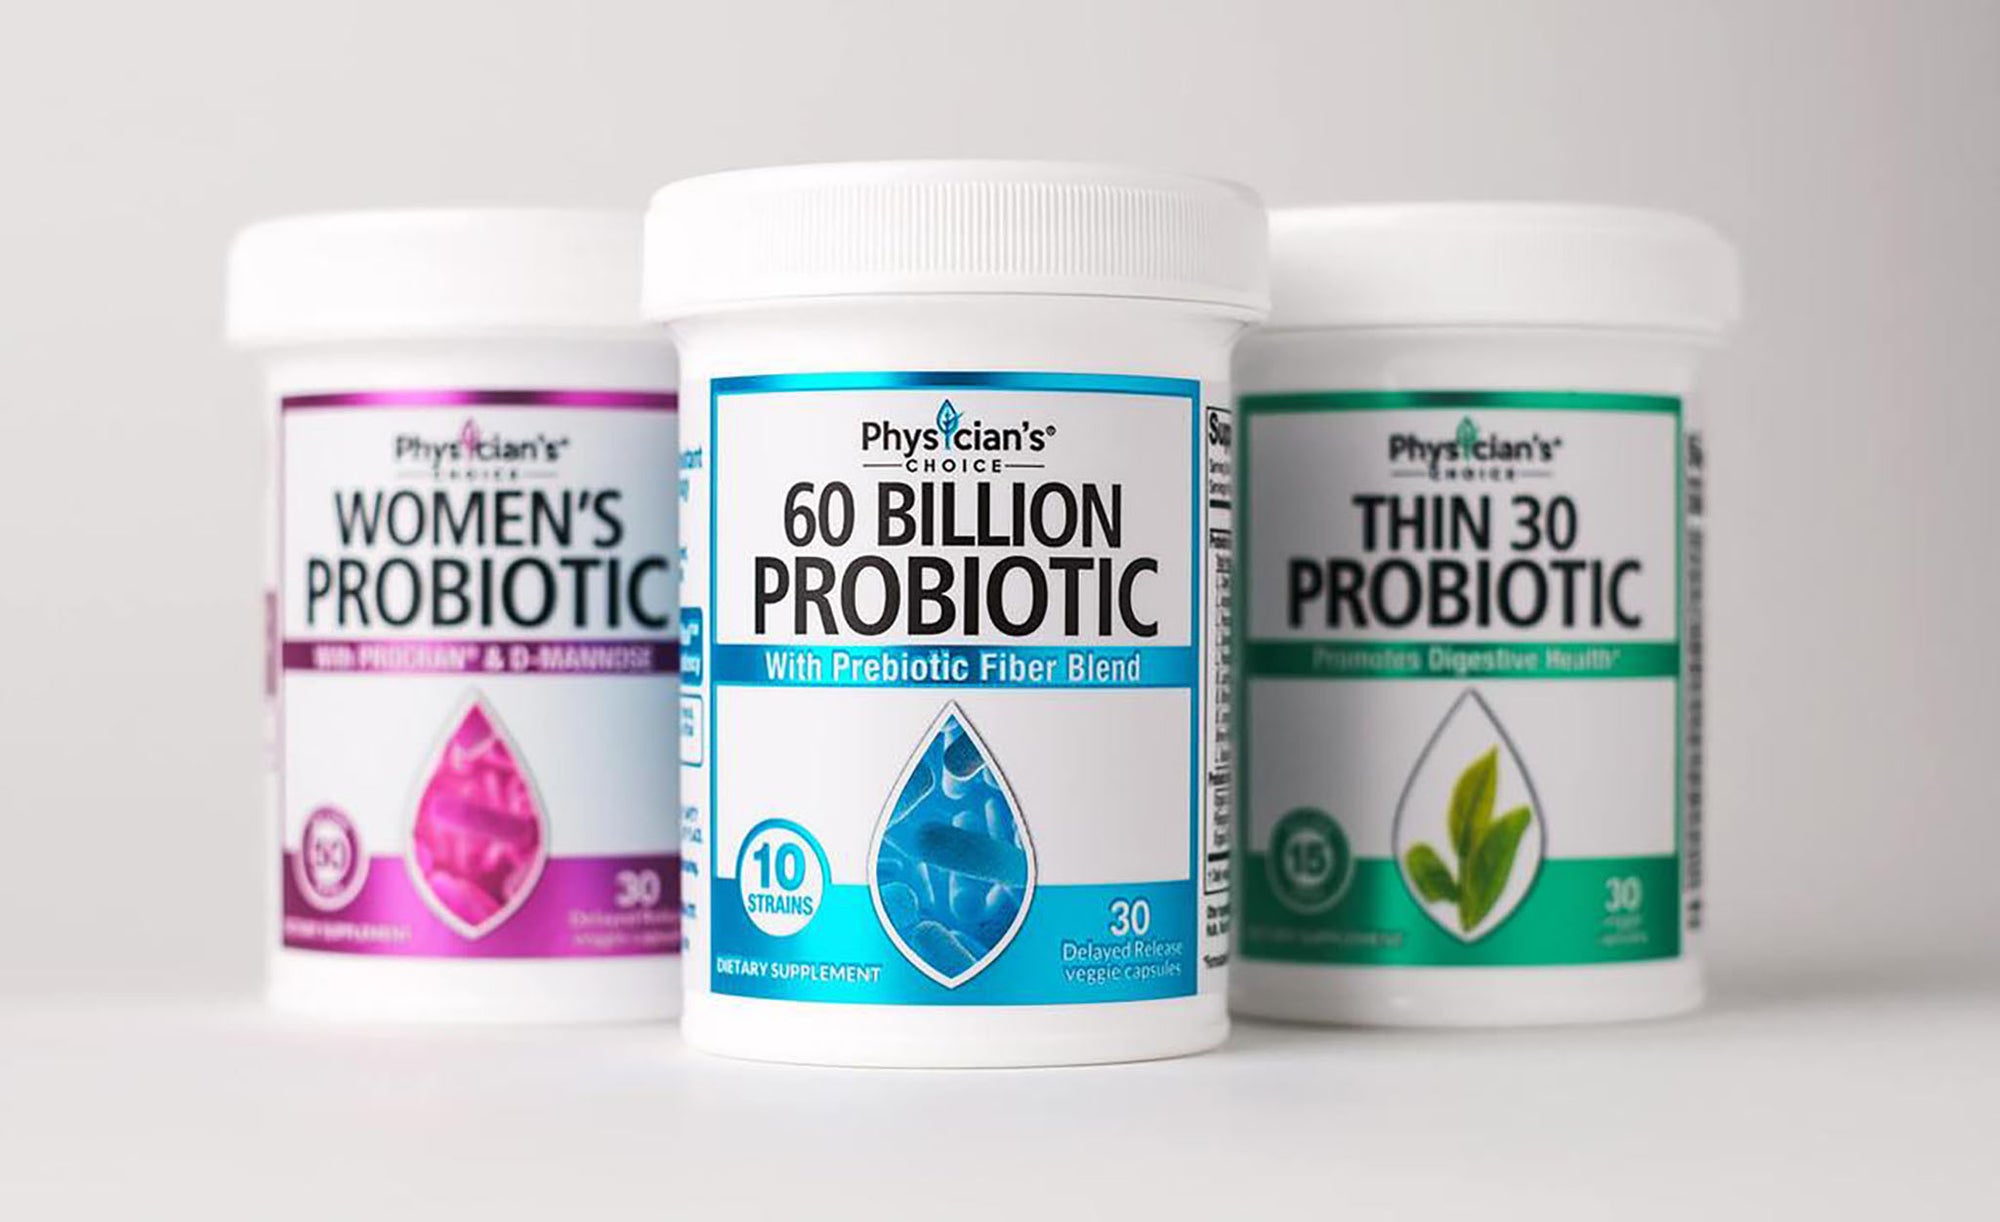 Physician's Choice 60 Billion Probiotic, Women's Probiotic, and Thin 30 Probiotic